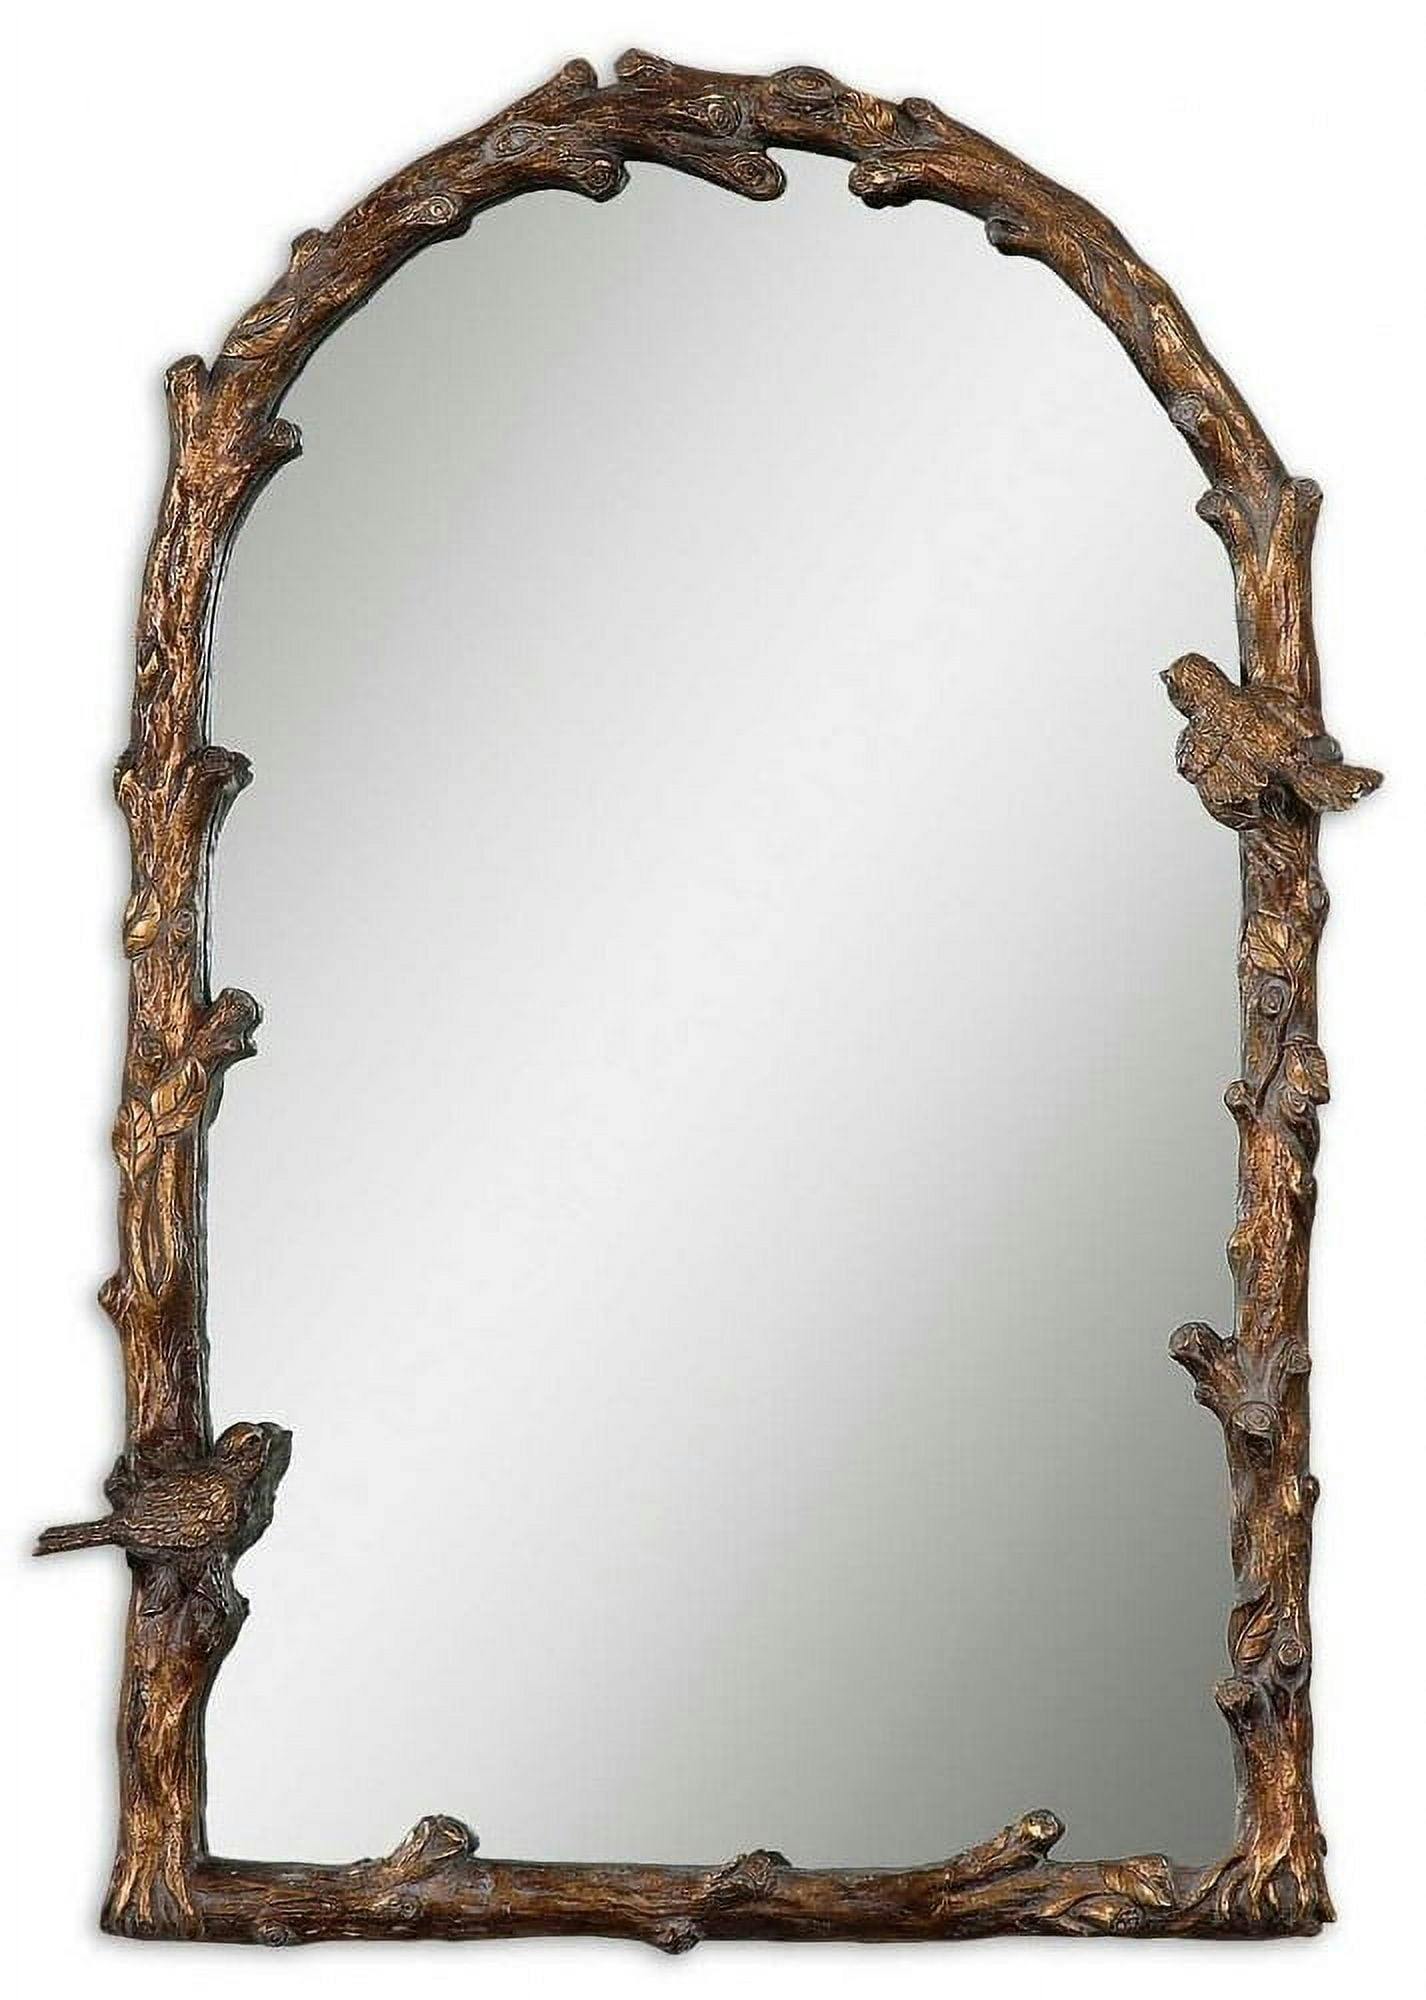 Antique Gold Leaf Arch Mirror with Distressed Frame and Songbird Accents